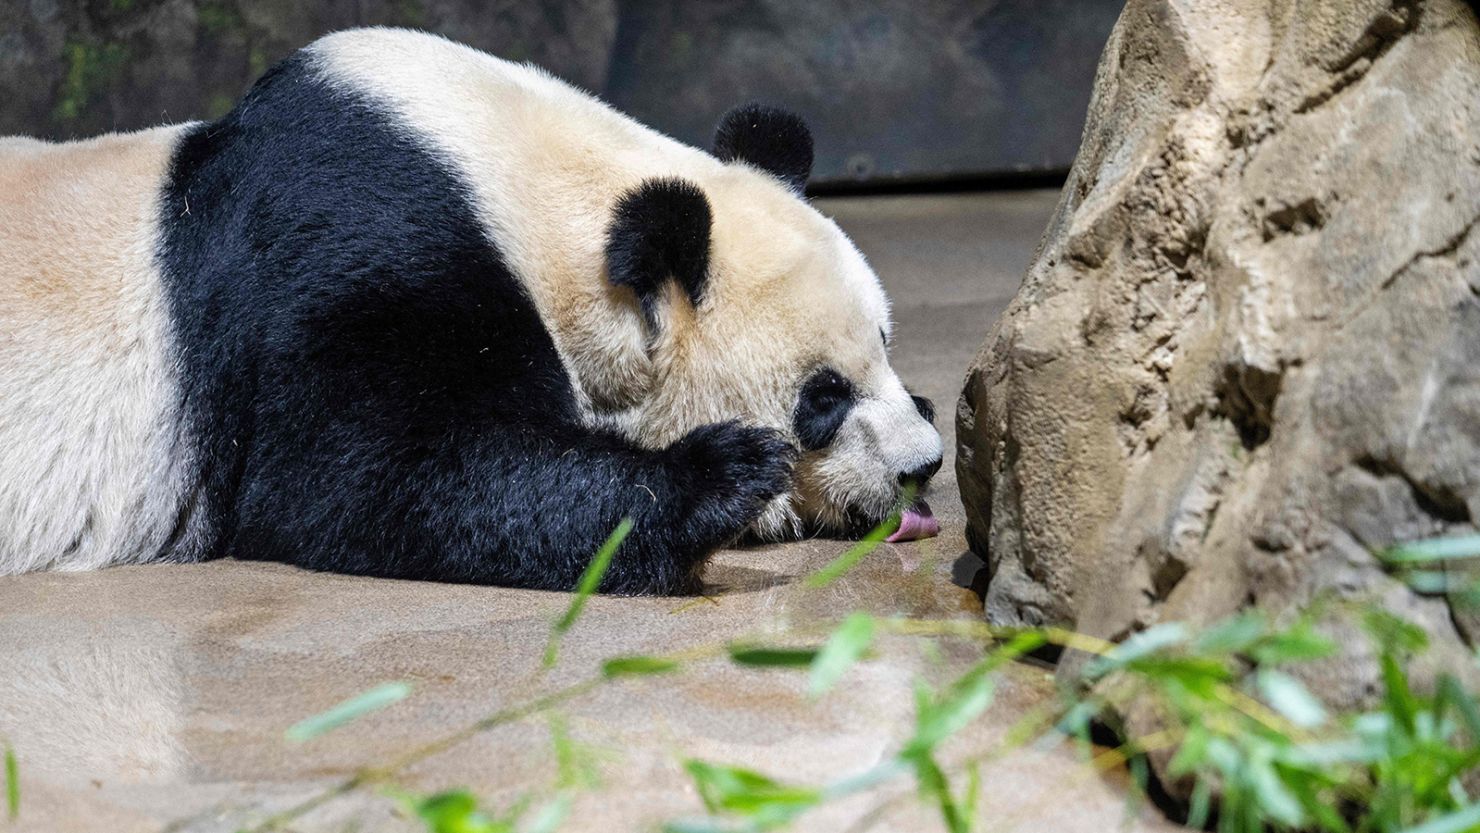 The giant panda Mei Xiang licks up water while resting in its enclosure at the Smithsonian National Zoo in Washington, DC, on November 7, 2023.